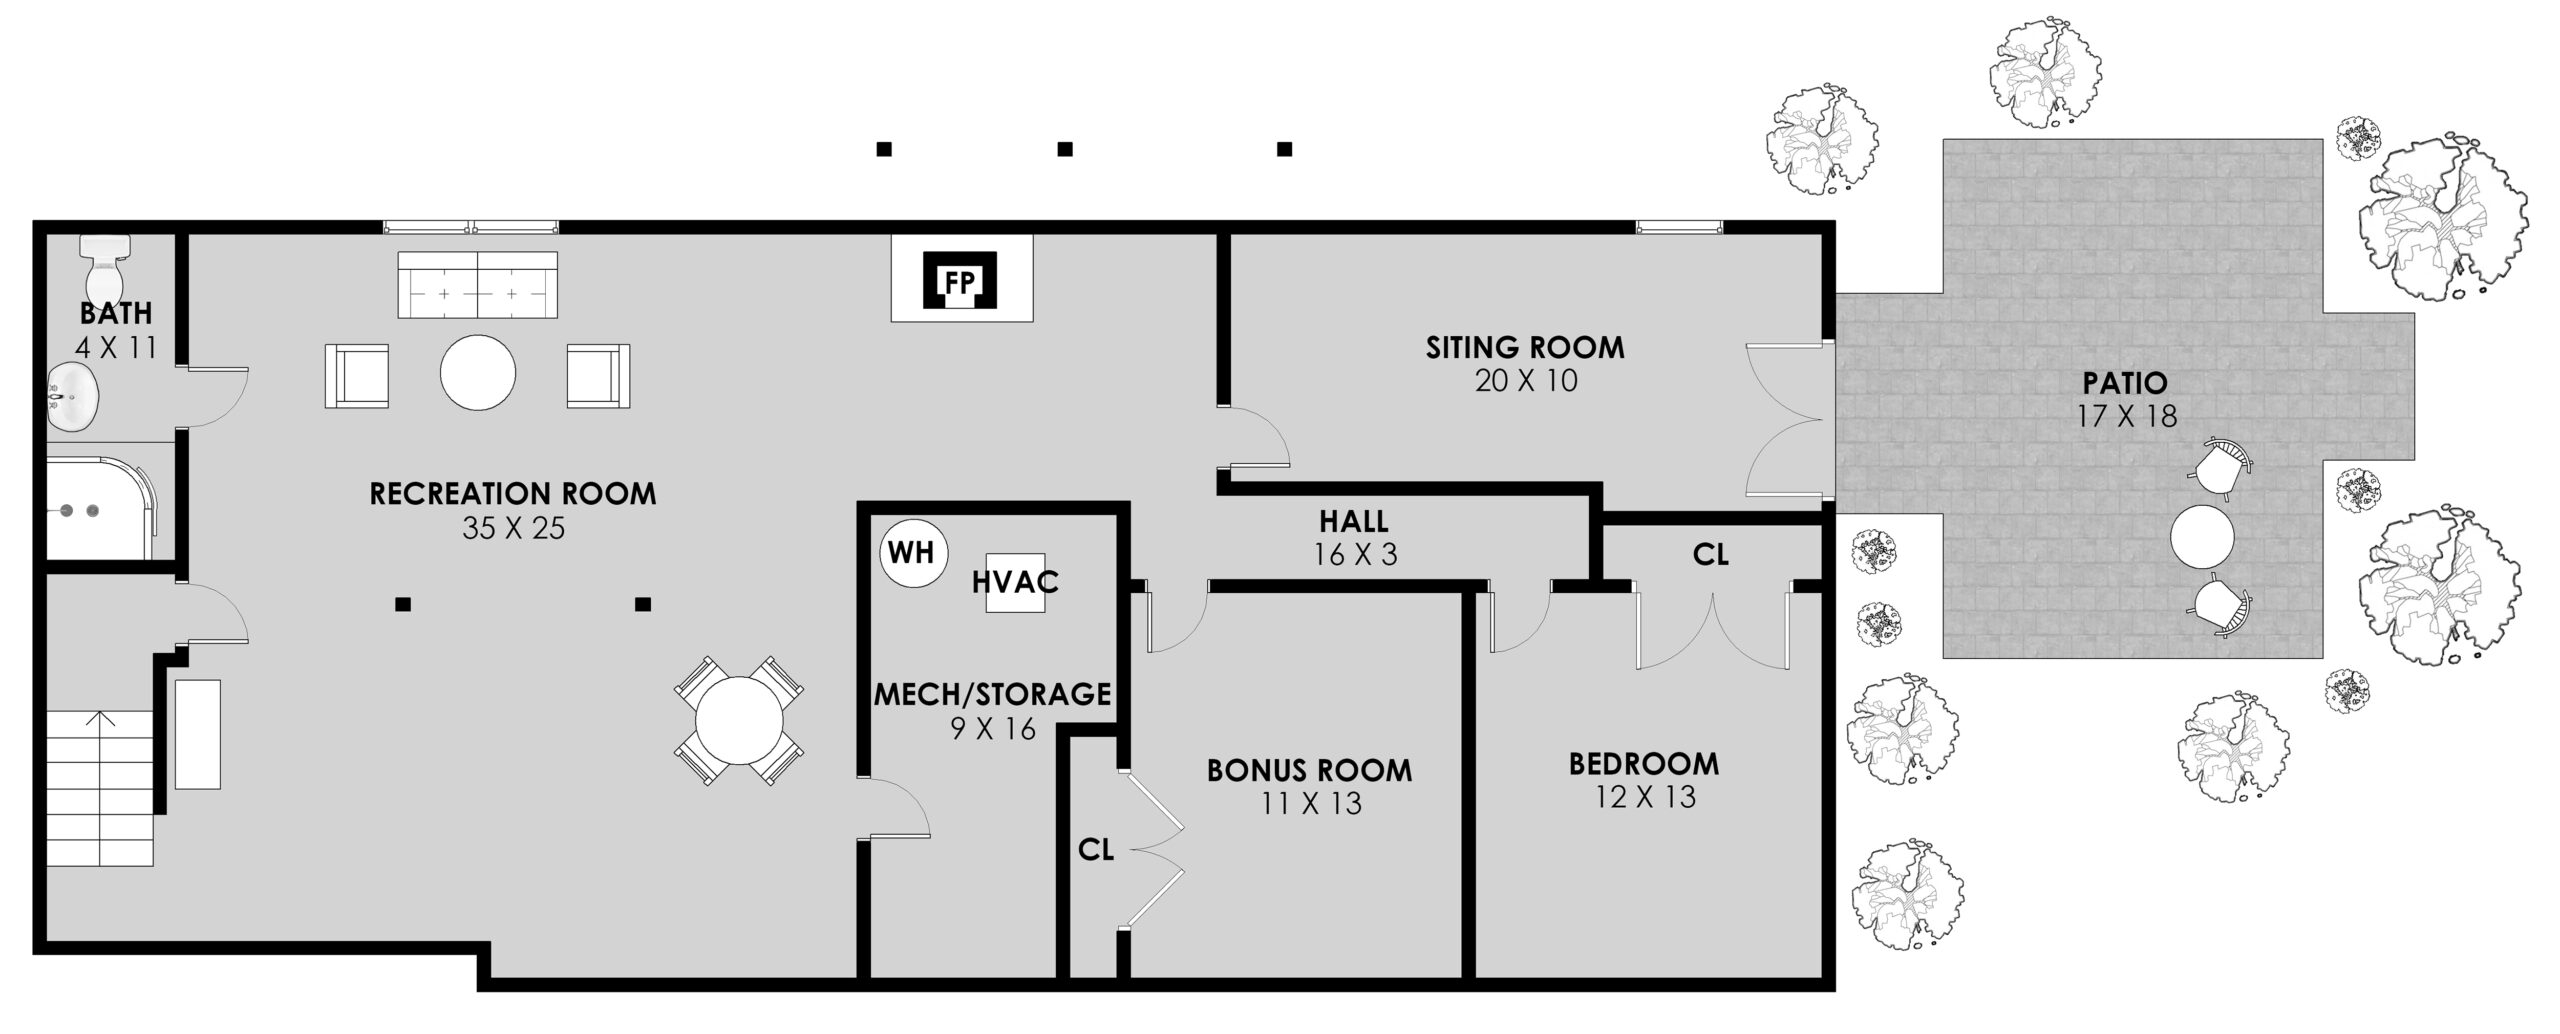 Professional high detail floor plan of of 3103 Indian Run Rd - showing the lower level with details of furniture, fireplace, cooling functions, and exterior landscaping and patio